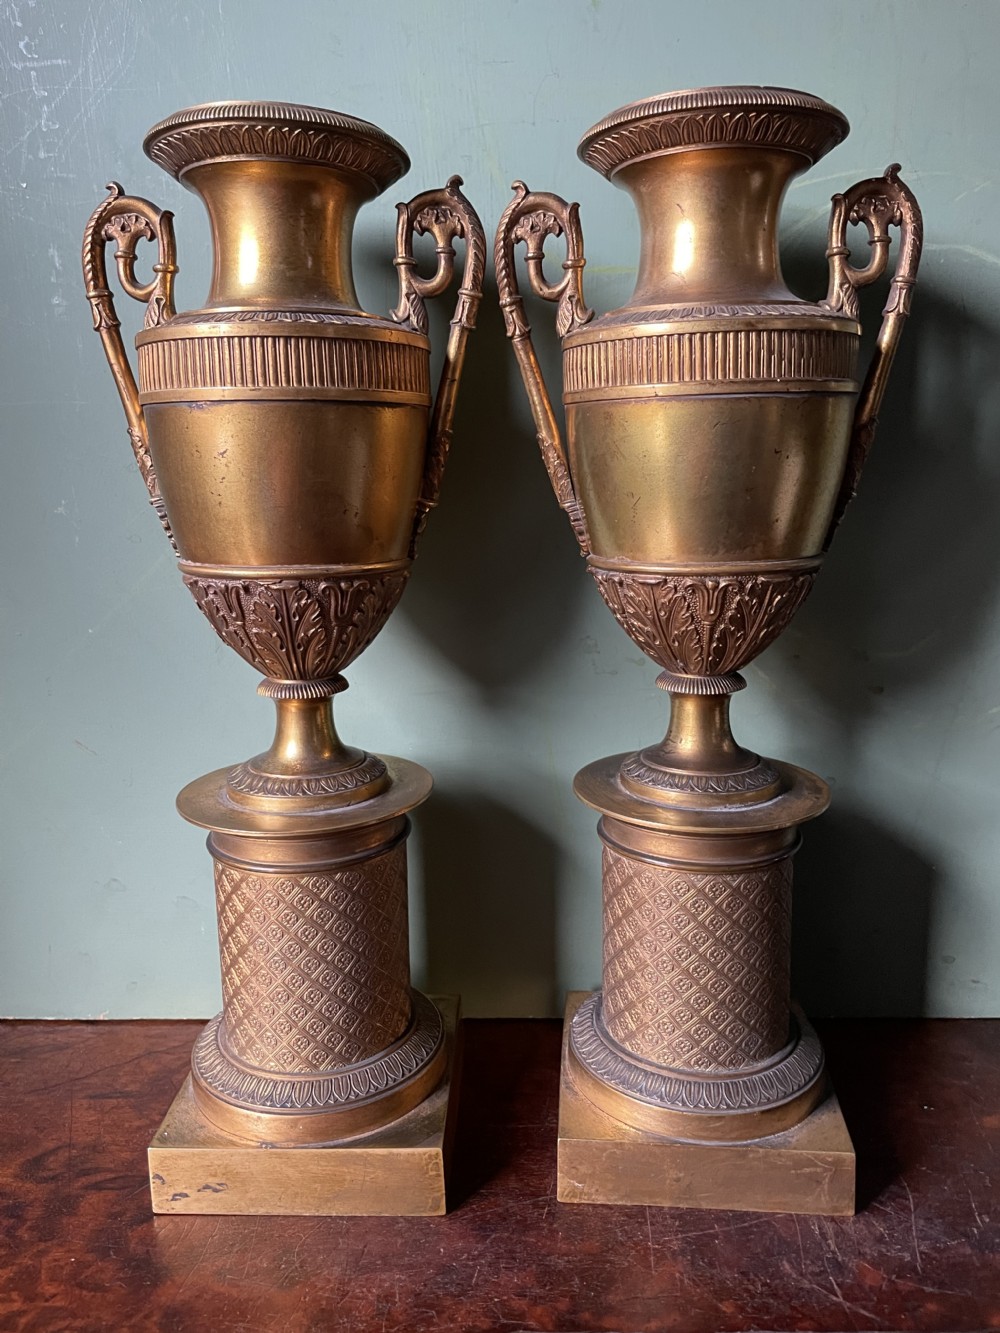 pair of early c19th french empire restauration period giltbronze vases